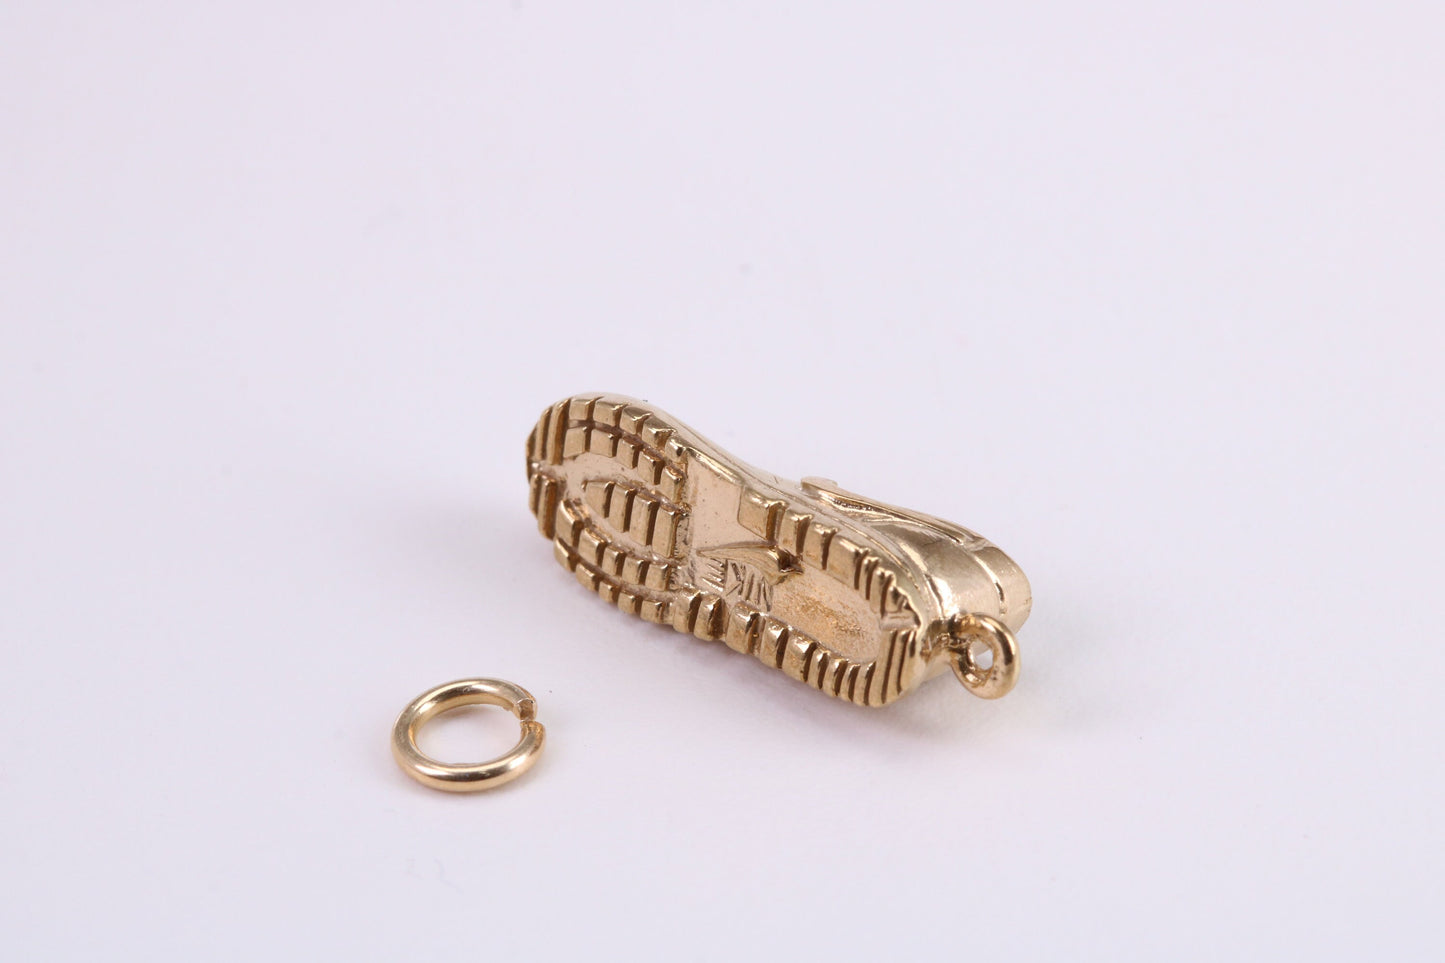 Trainer Shoe Charm, Traditional Charm, Made from Solid Yellow Gold, British Hallmarked, Complete with Attachment Link